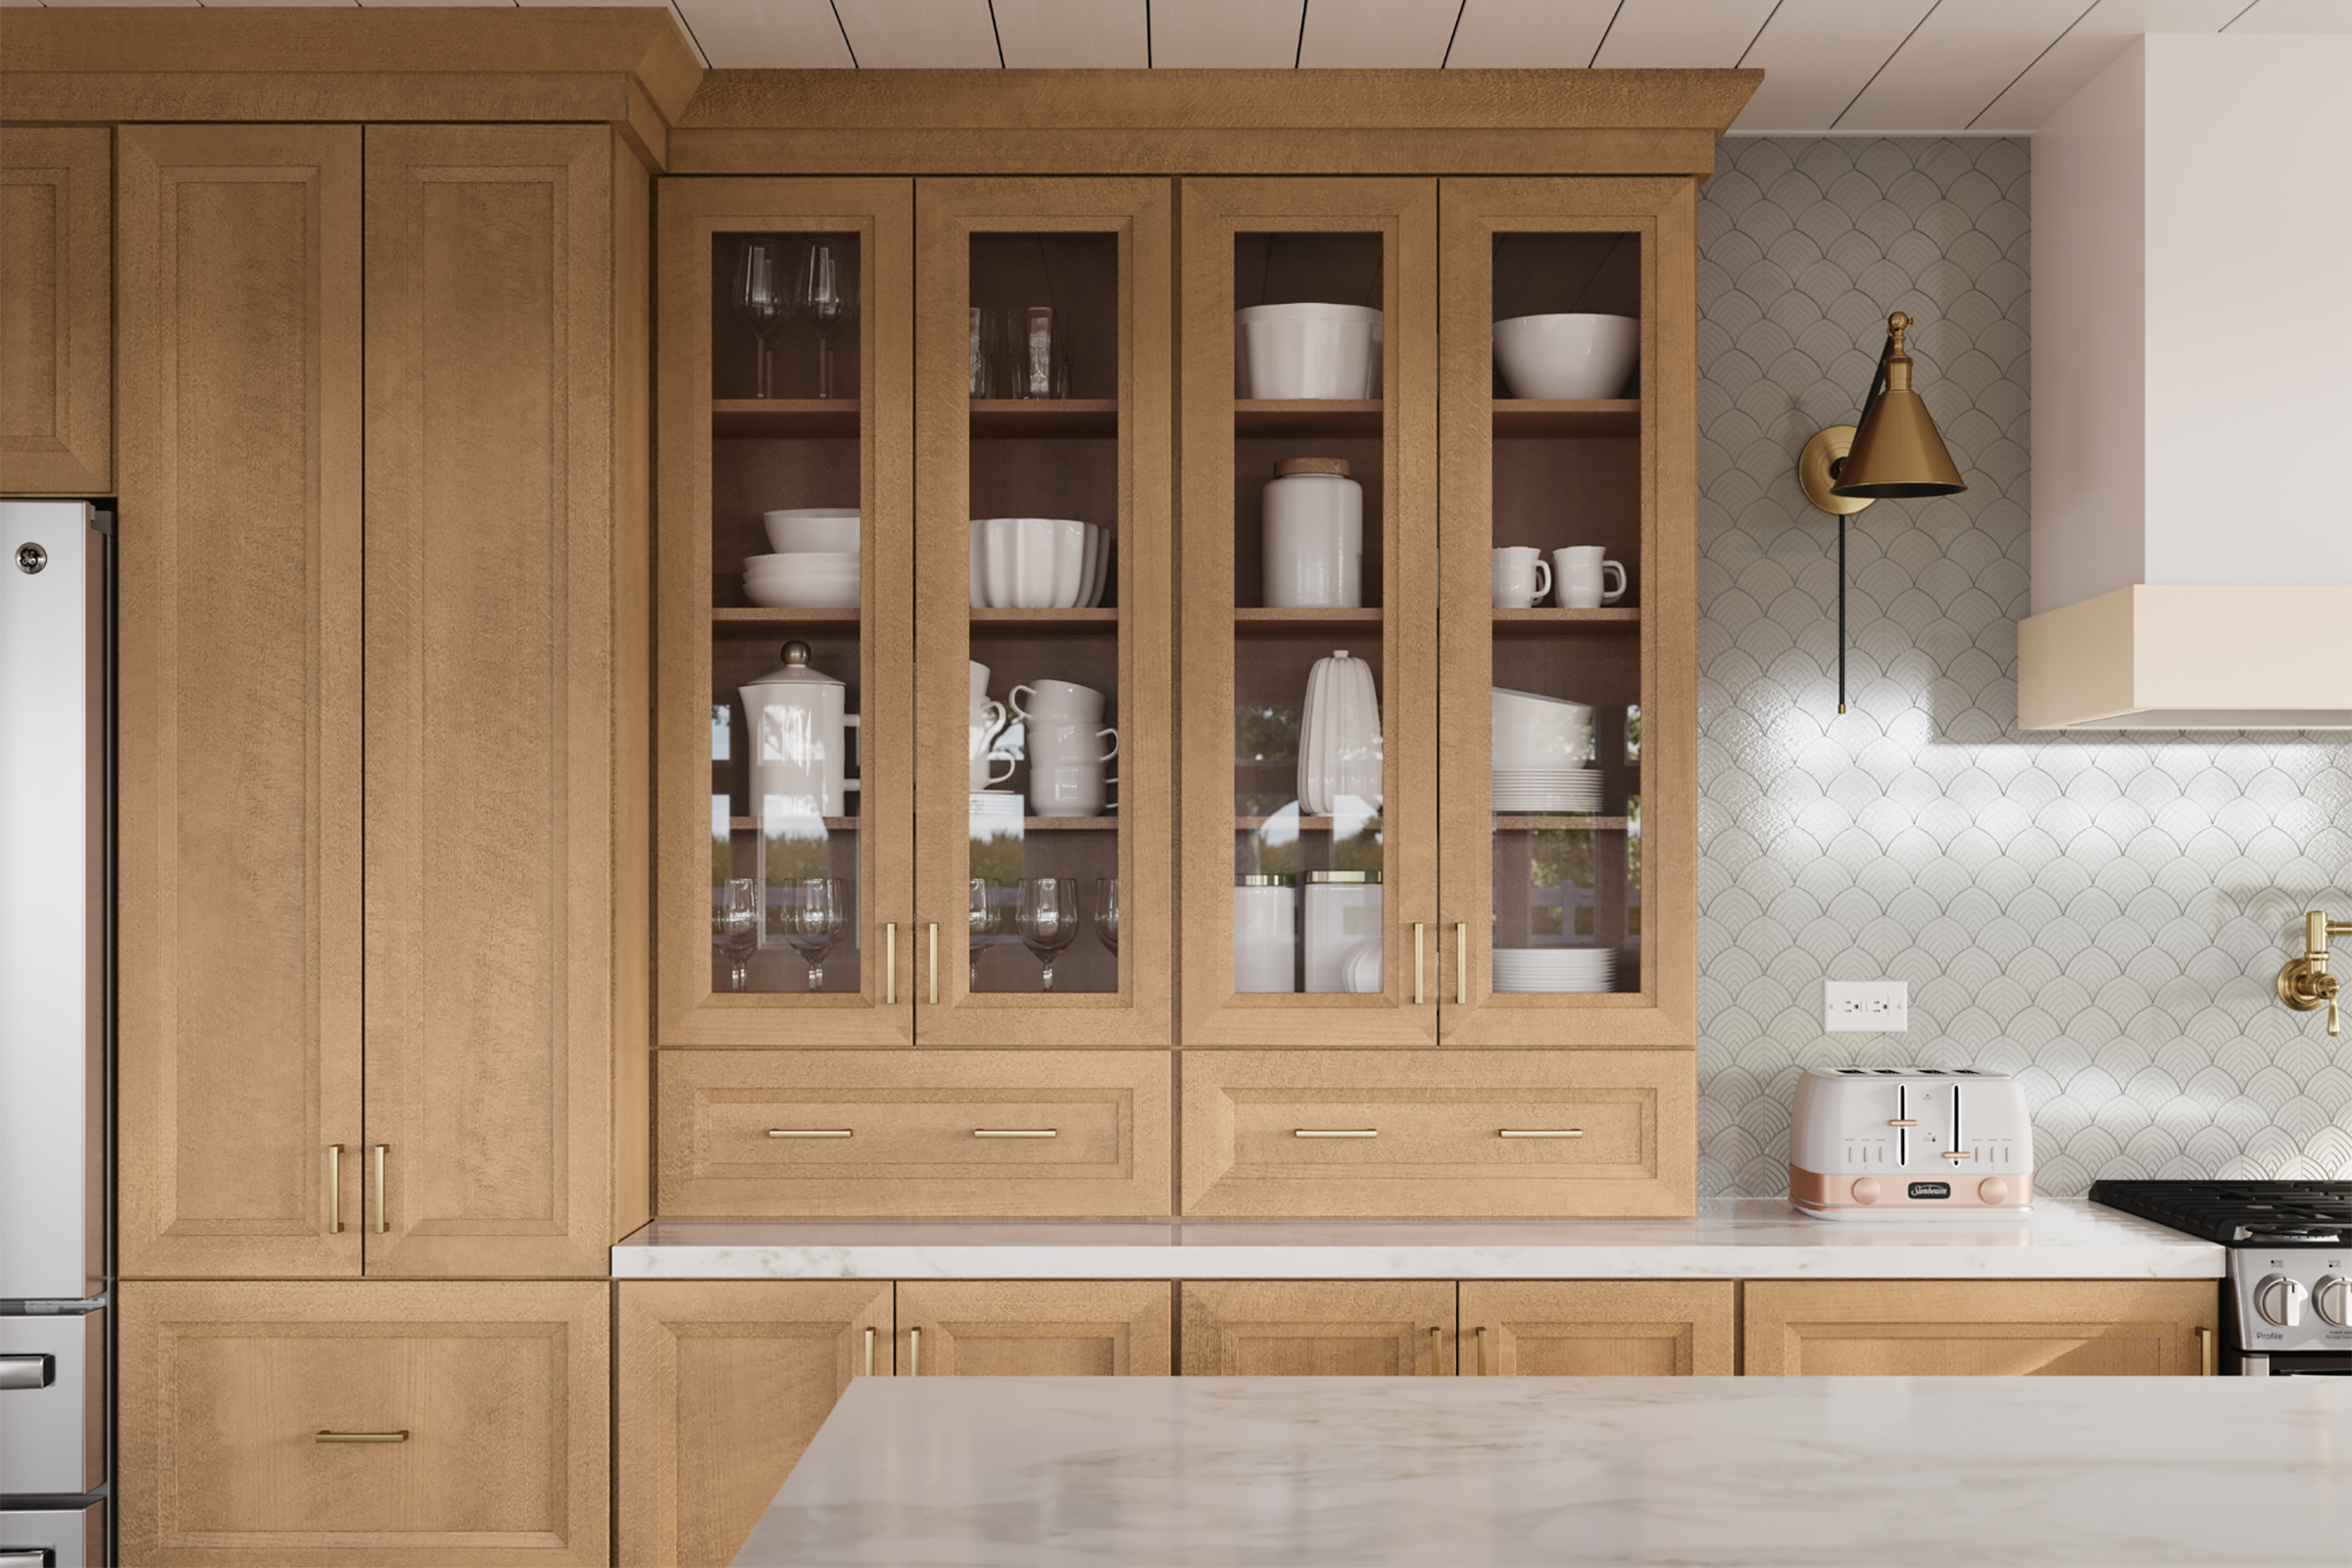 KraftMaid Quartersawn Oak cabinets with glass doors displaying white dishware in a cottagecore-style kitchen